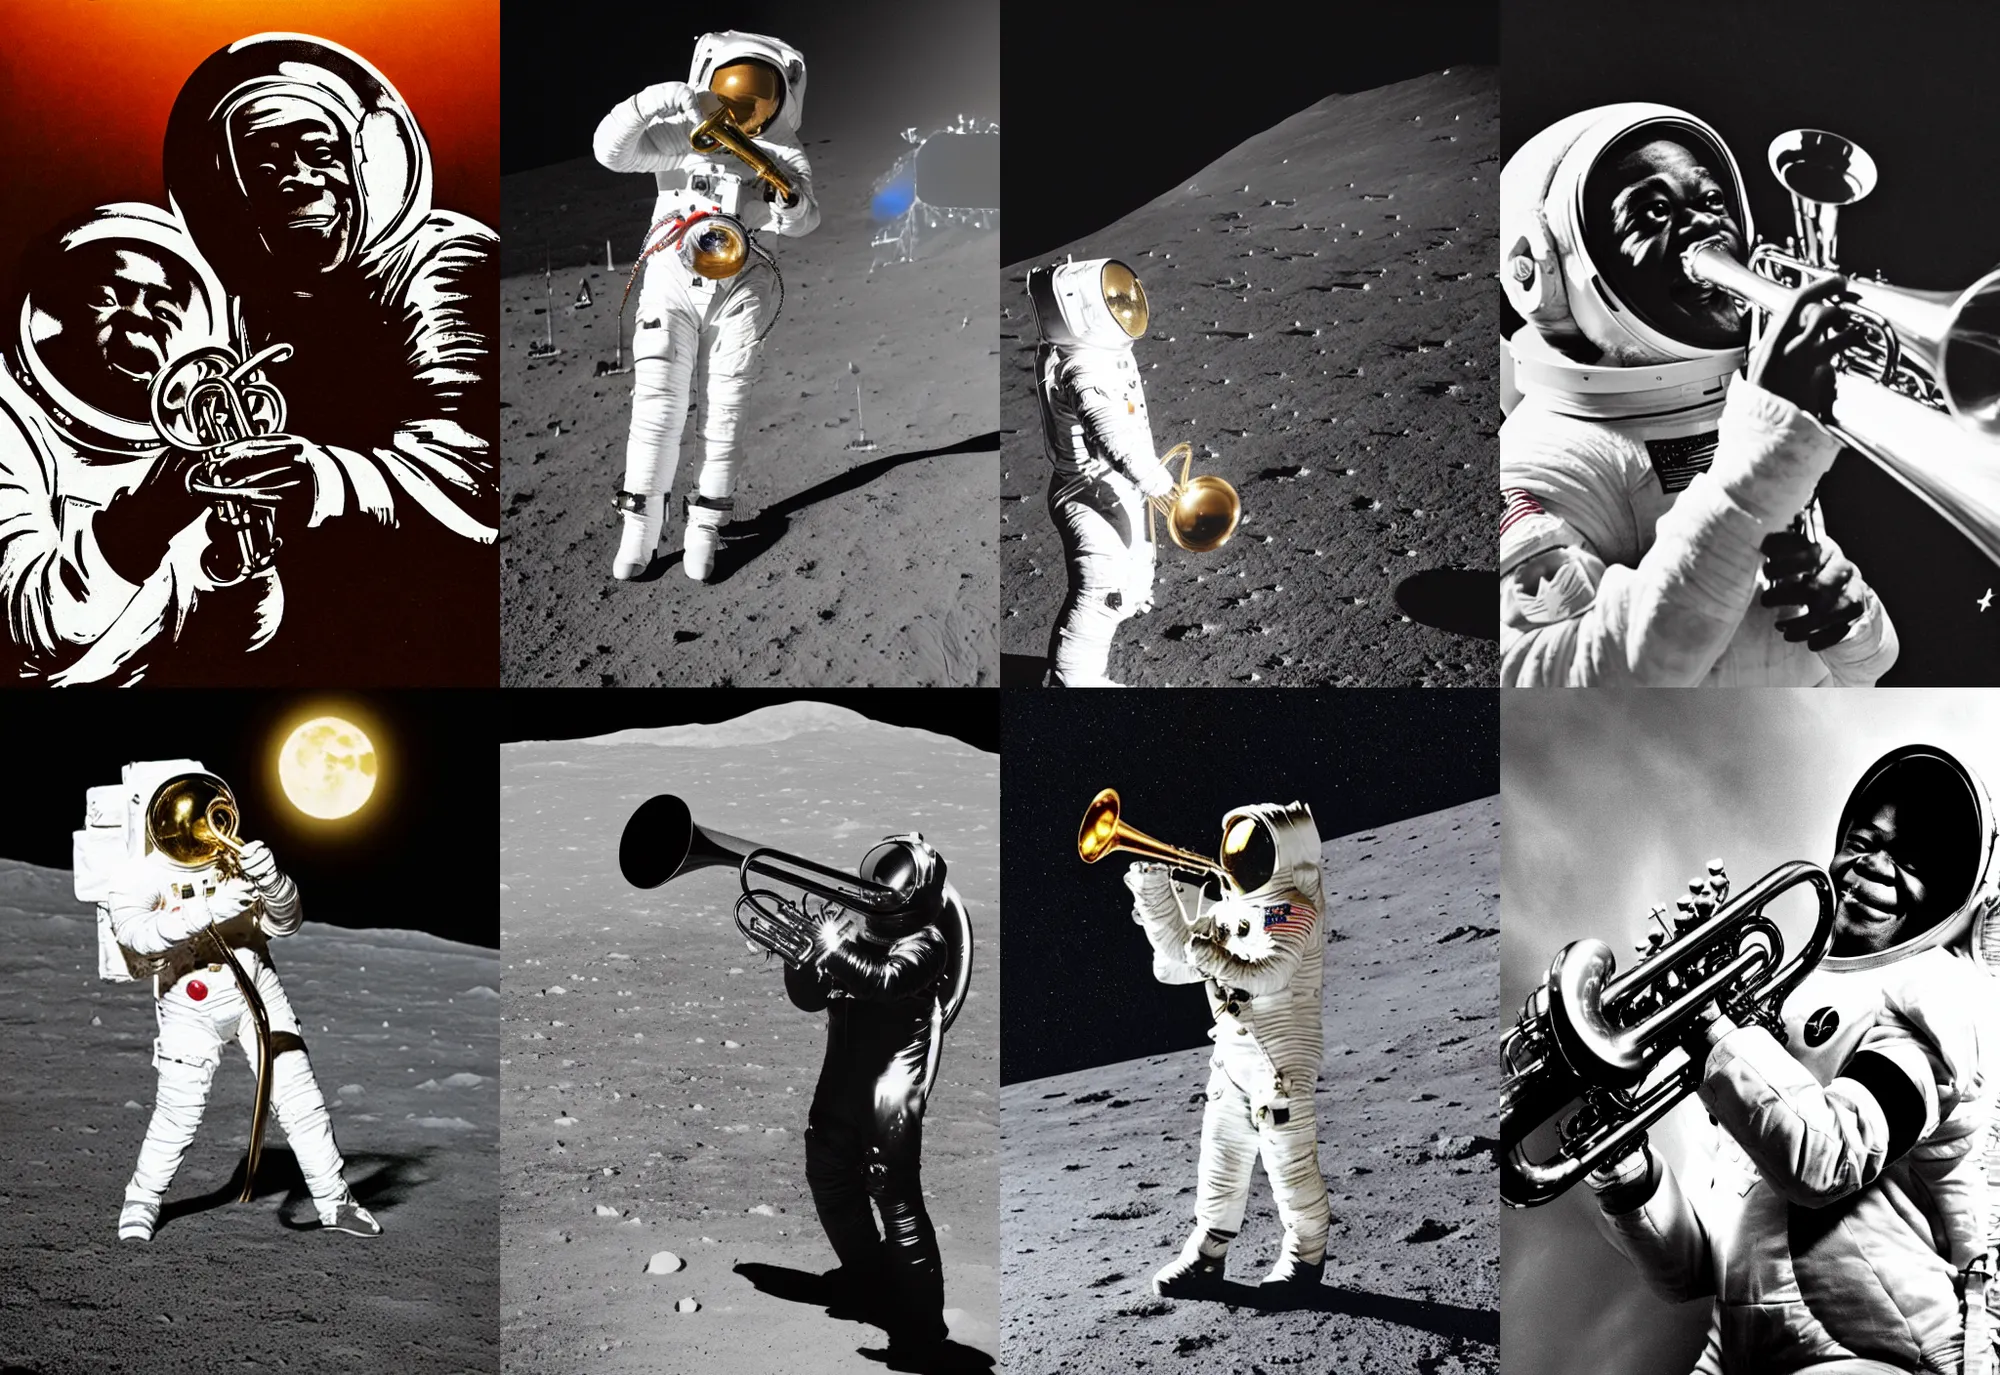 Prompt: a photo of louis armstrong wearing a space suit on the moon, holding a trumpet, dramatic lighting, highly detailed